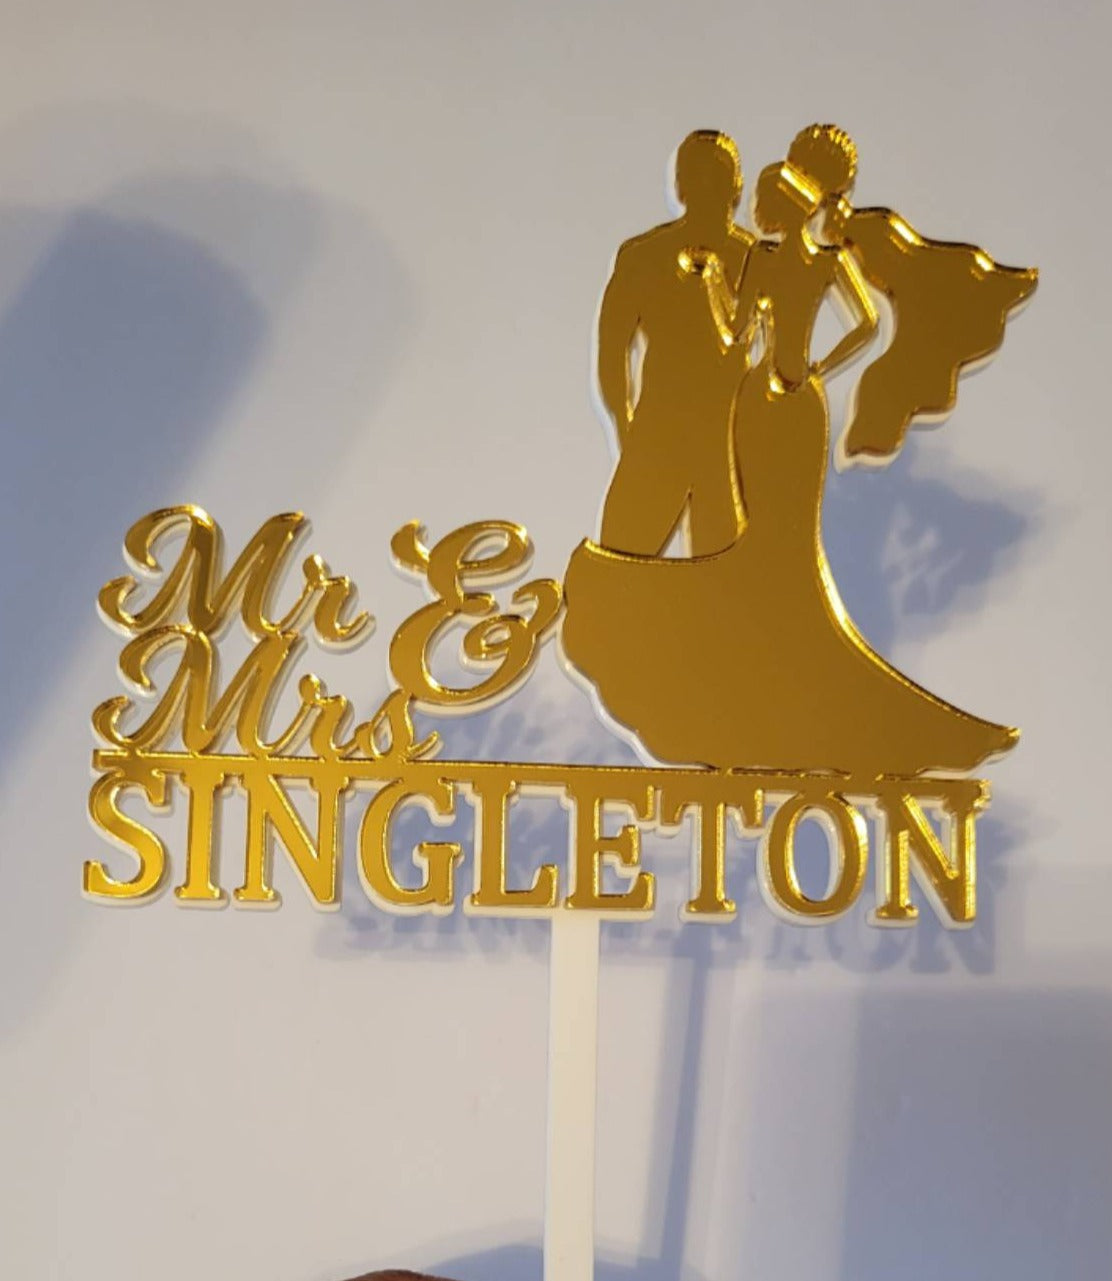 Gold mirror wedding cake topper with silhouette